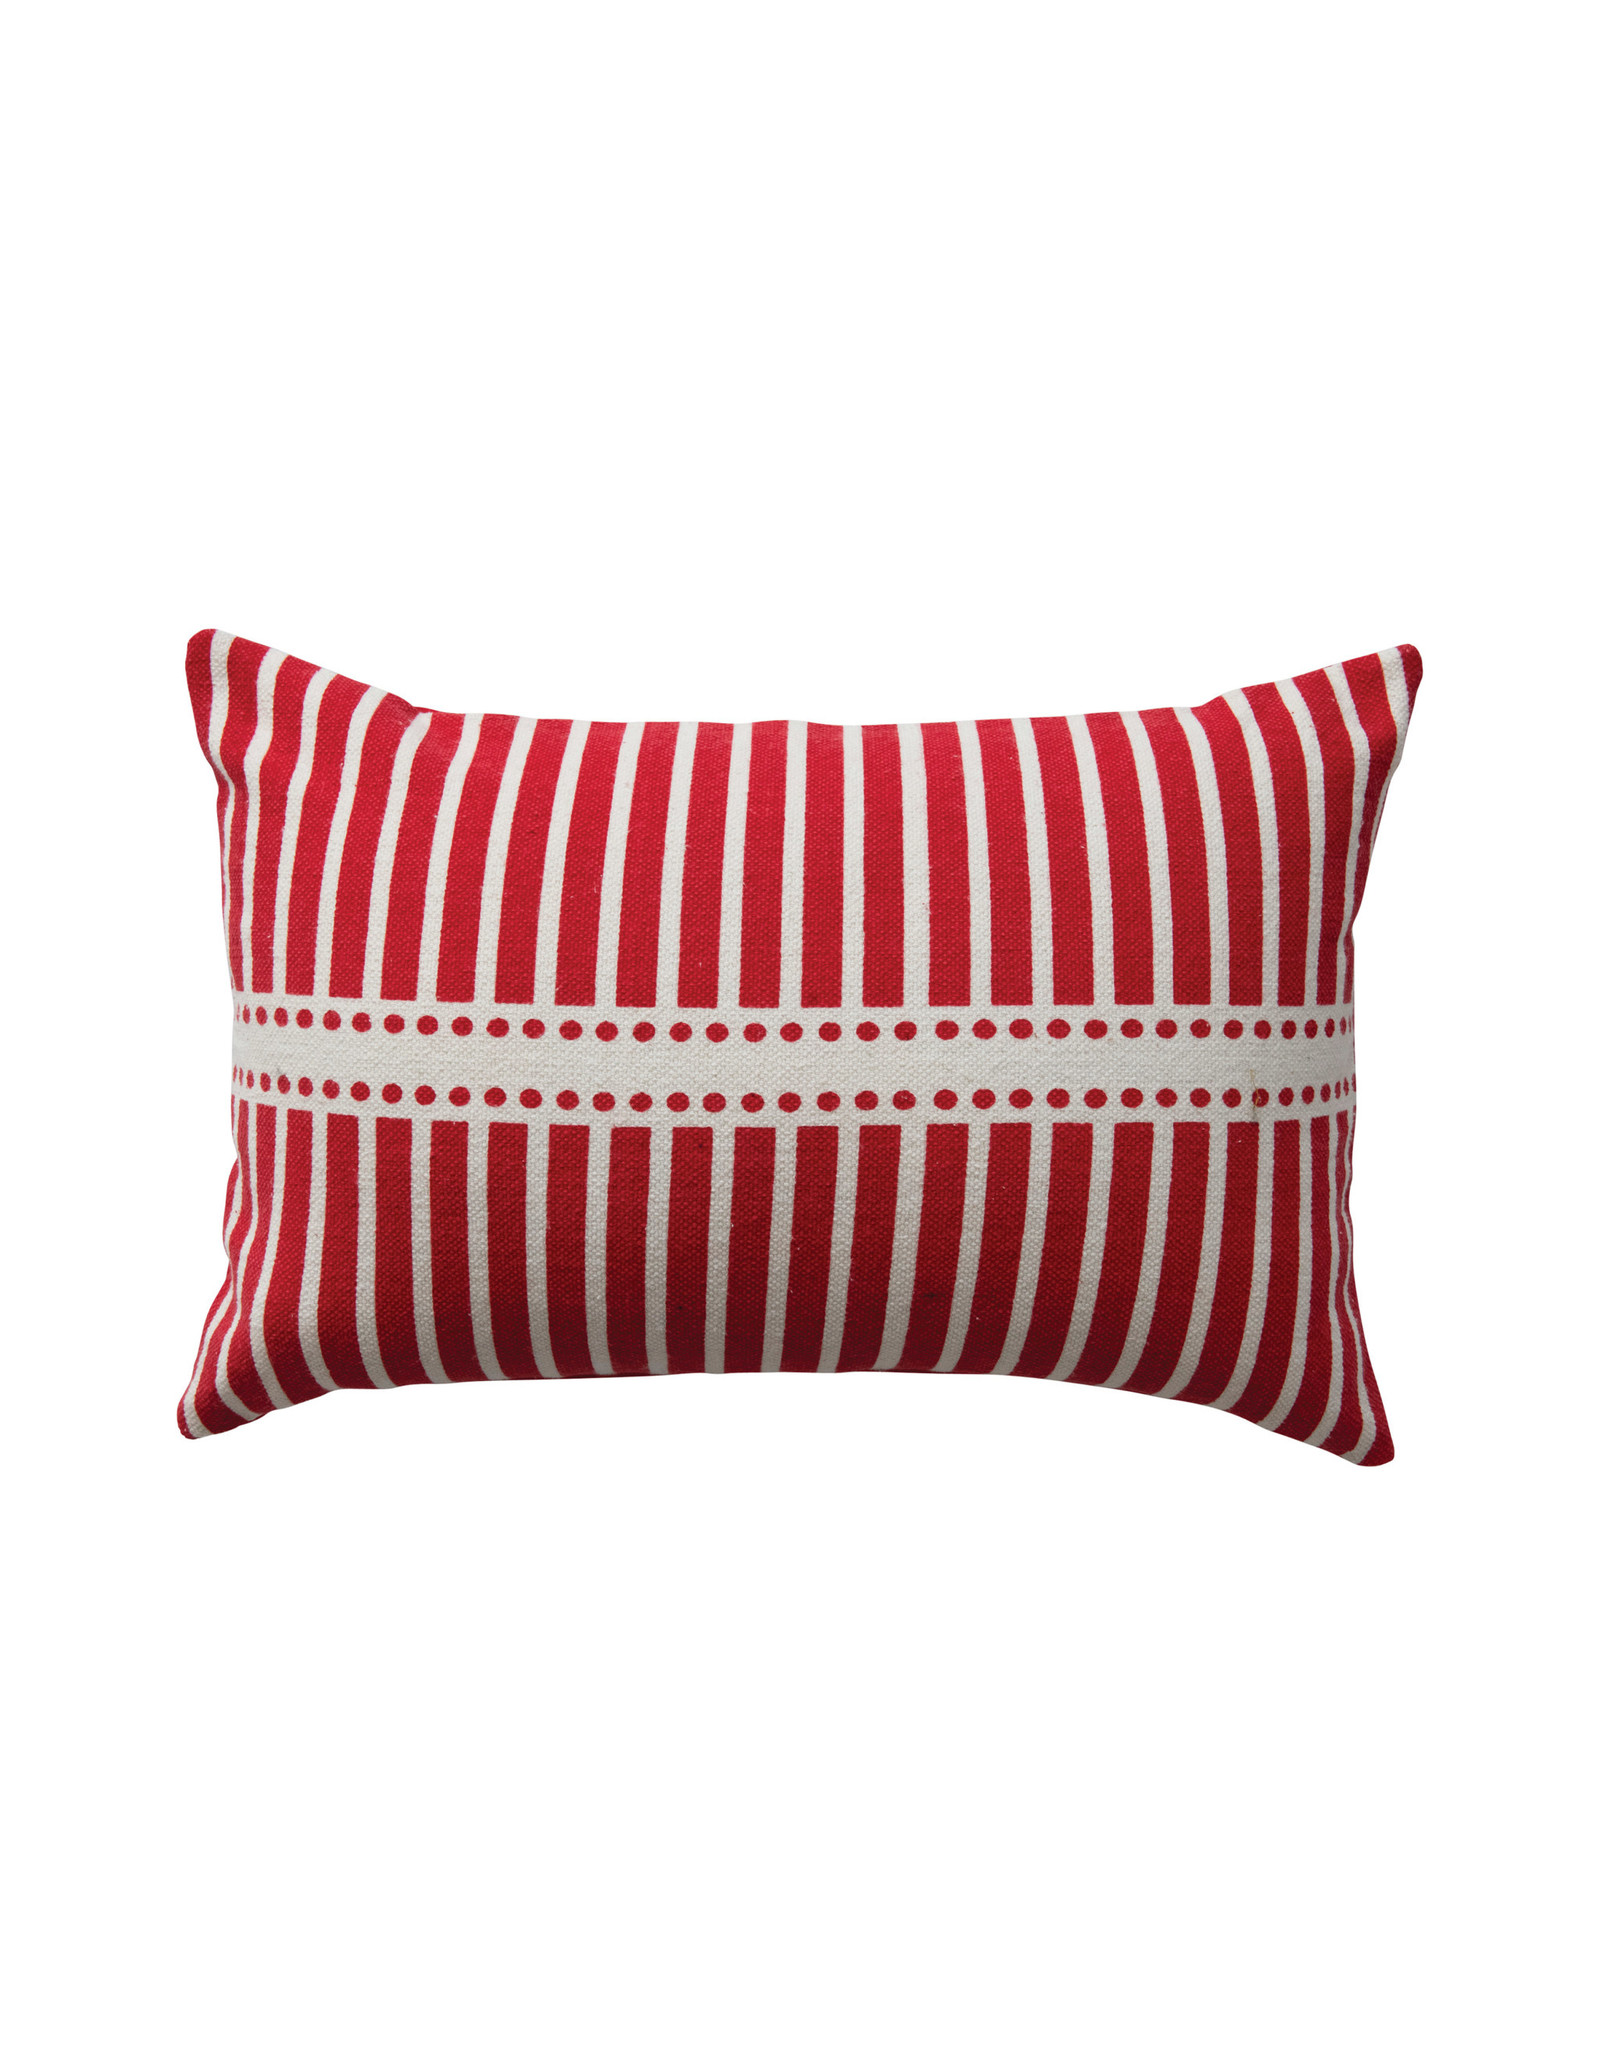 XS0376 24" x 16" Cotton Chambray Lumbar Pillow with Stripes, Red & White